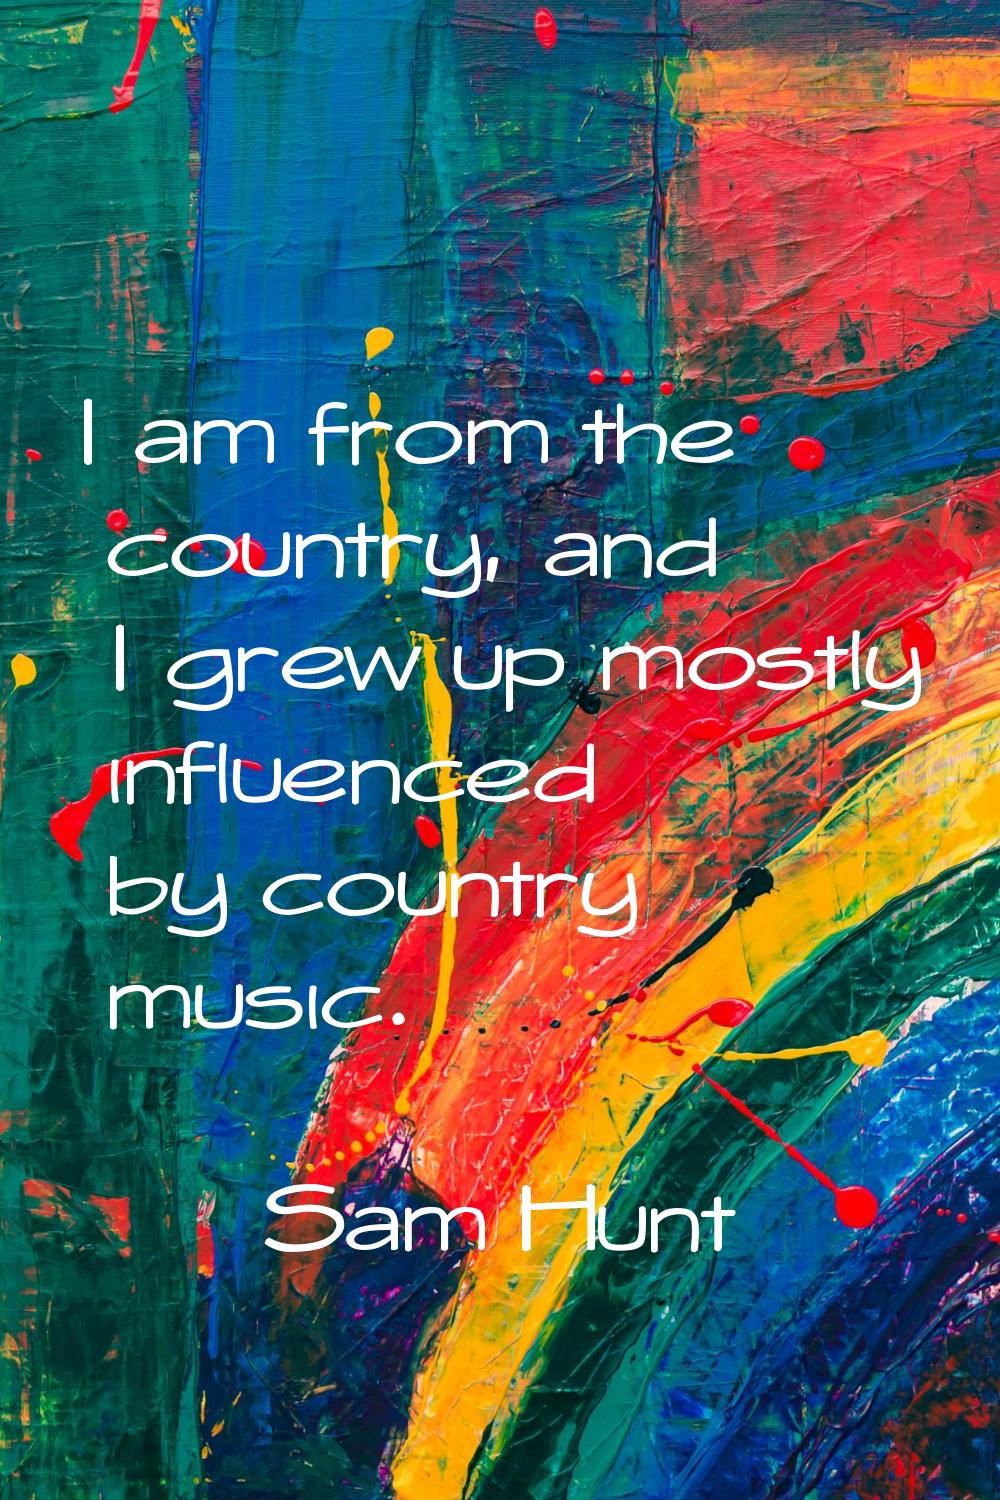 I am from the country, and I grew up mostly influenced by country music.